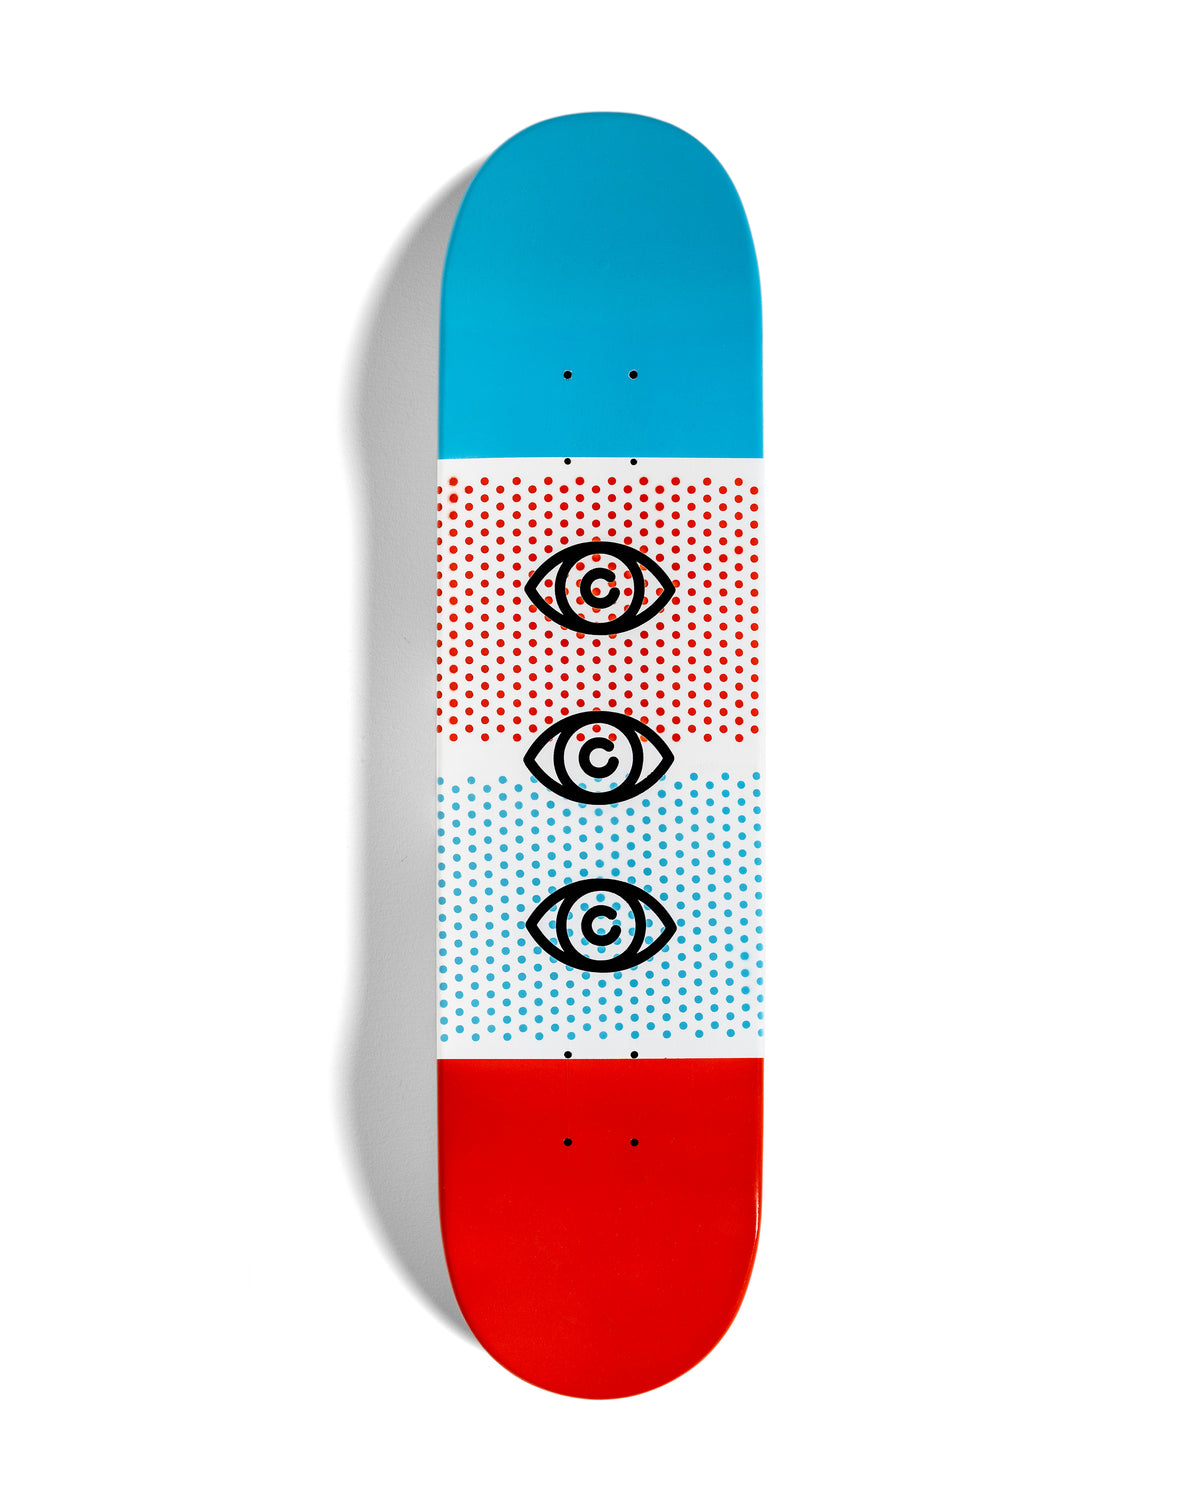 An original painting on a skateboard deck by the artist, Red Halftone. A vertical design of 4 even color fields consisting of: Solid red, a cyan halftone pattern, a red halftone pattern, and solid cyan stacked from bottom to top. On top of the color fields are three eye shaped red halftone logos in black. Painted in a monoline and popart fusion style.